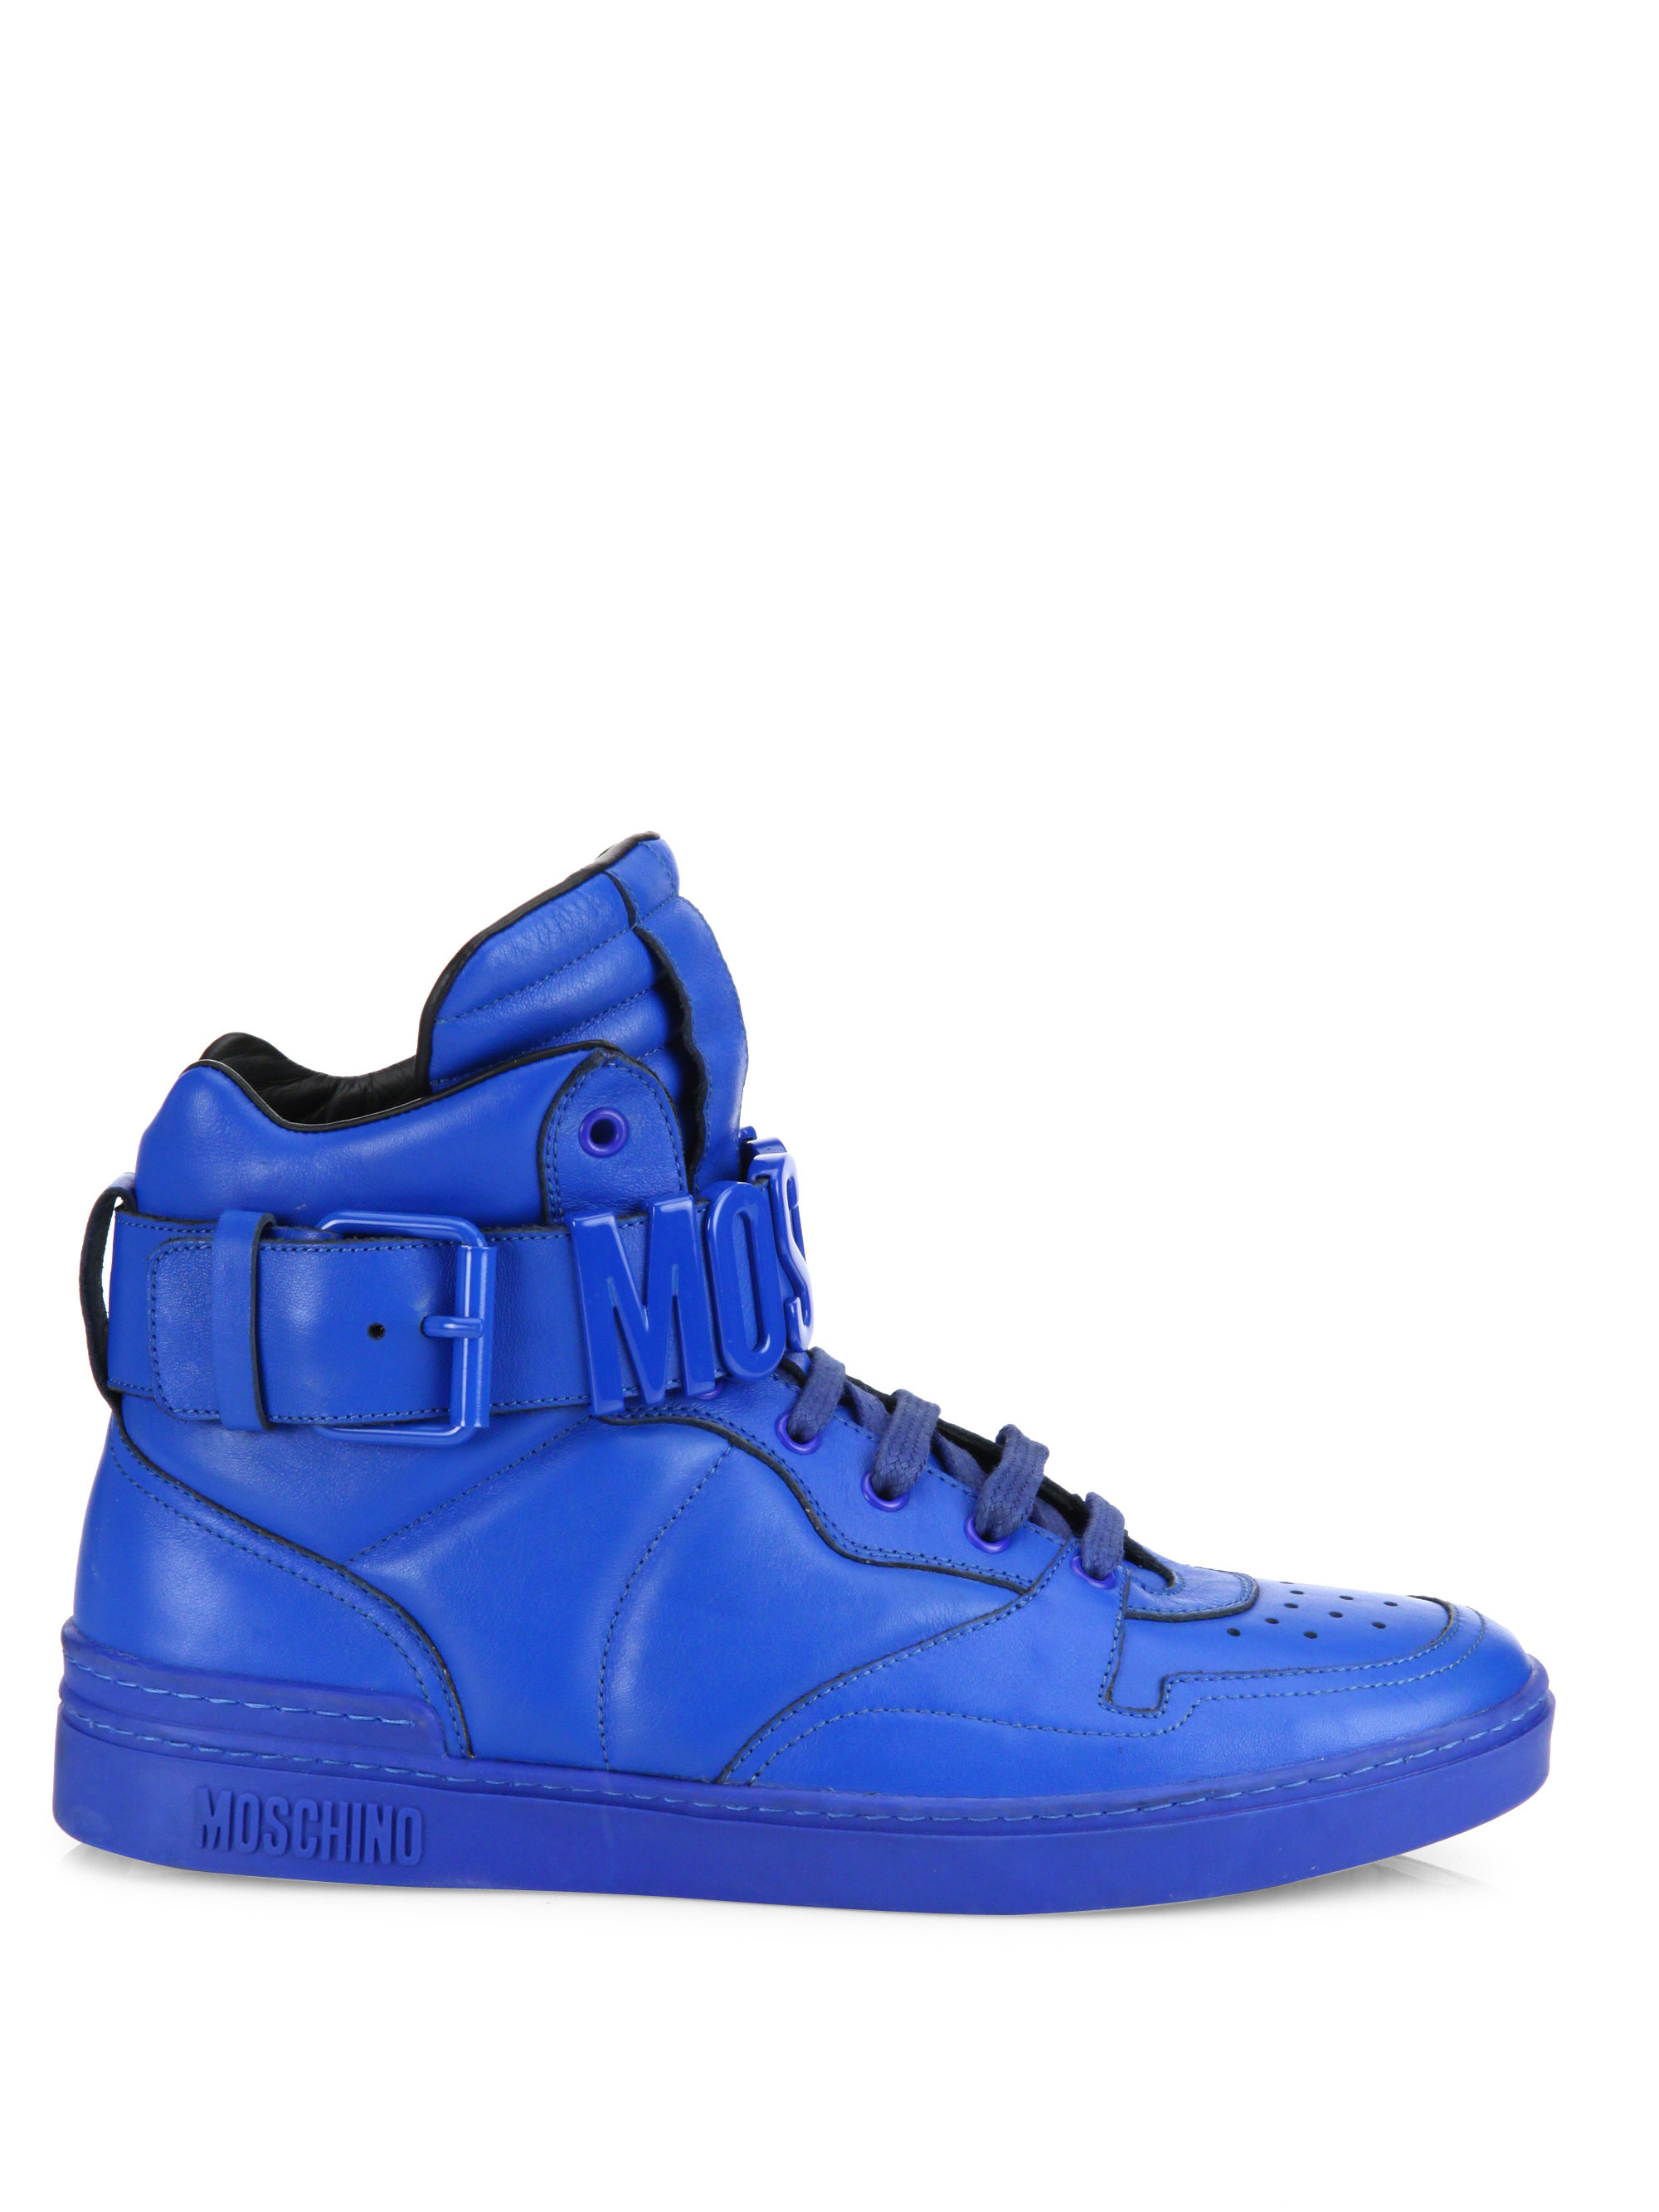 Lyst - Moschino Leather High-top Sneakers in Blue for Men